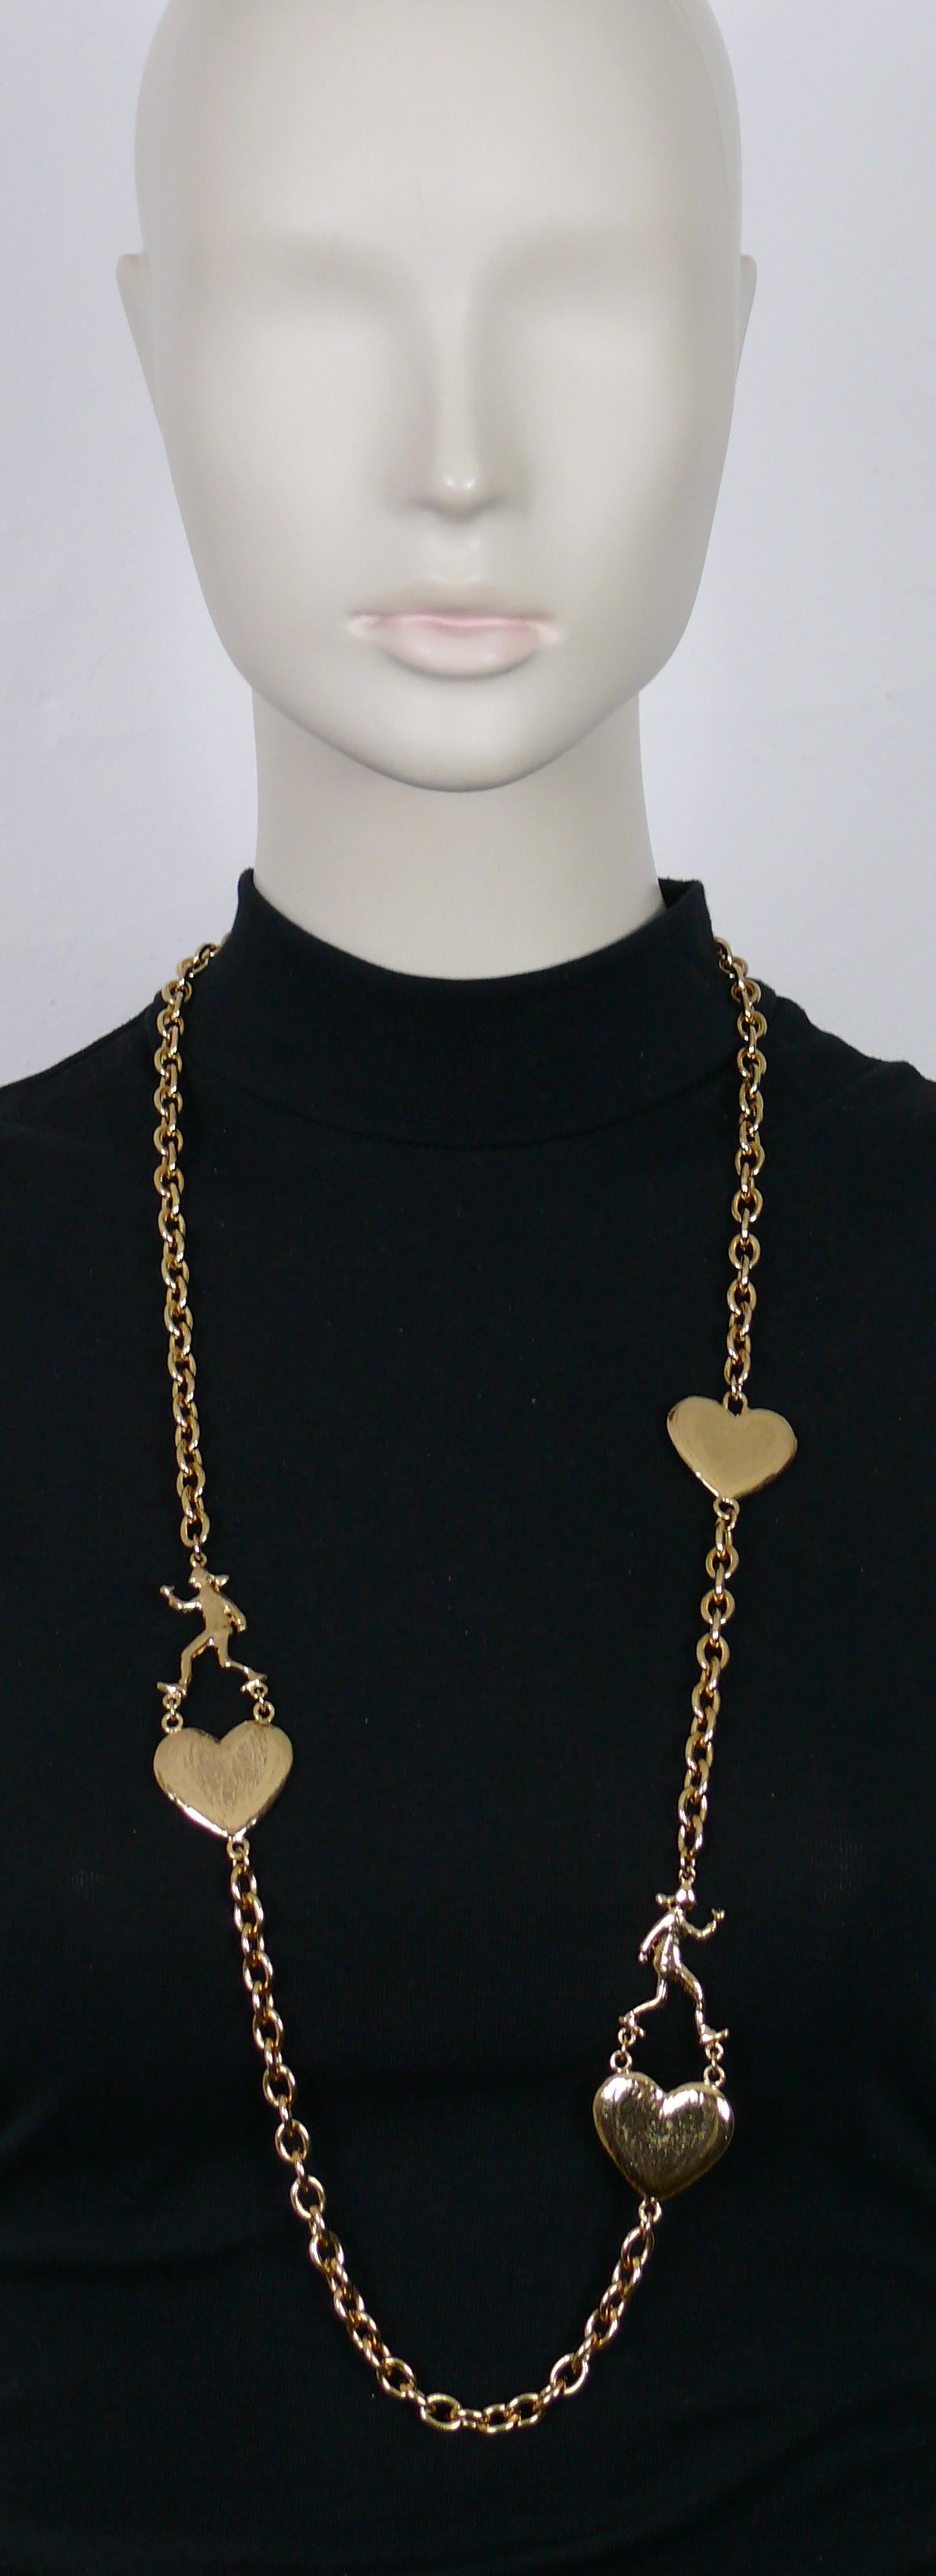 MOSCHINO vintage gold tone chain necklace featuring hearts and OLIVE OYL figures.

Spring clasp closure.

Embossed Cheap and Chic by MOSCHINO.

Indicative measurement : length approx. 93 cm (36.61 inches) / chain link width approx. 0.7 cm (0.28